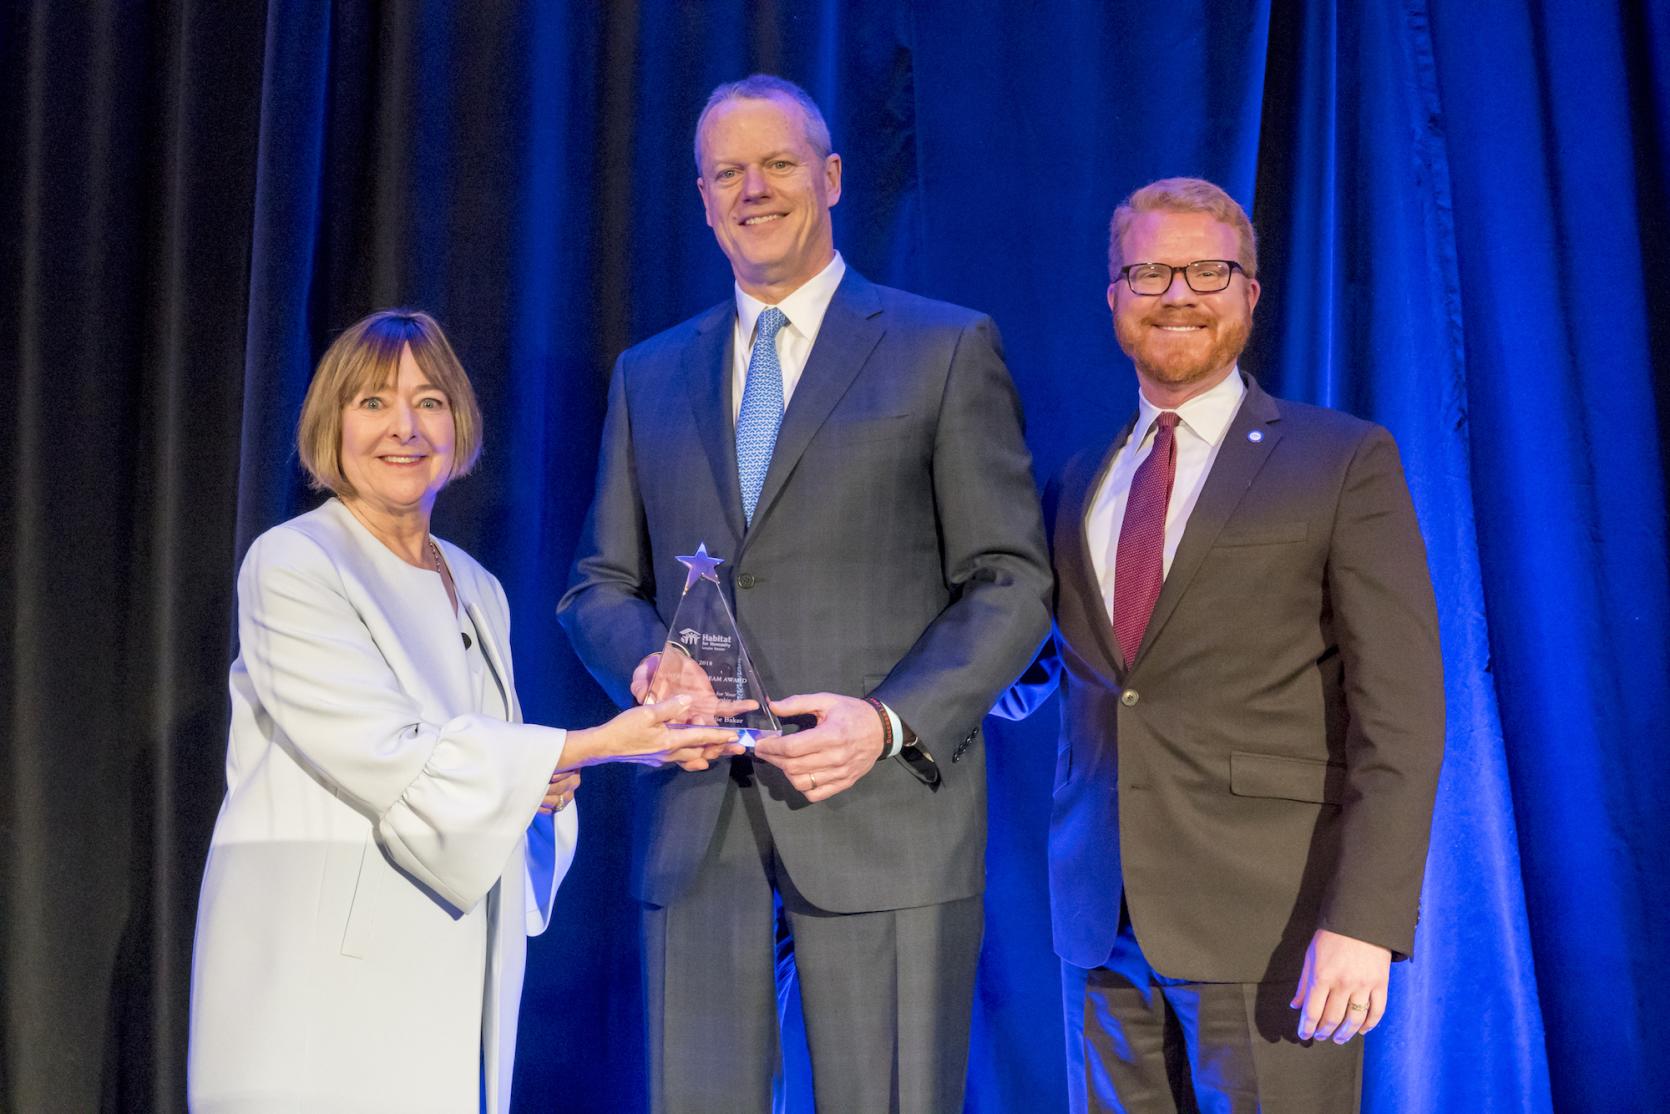 At this year’s Habitat for Humanity Greater Boston American Dream Awards Ceremony, Governor Baker was honored for his work to increase affordable housing options for low-income families.